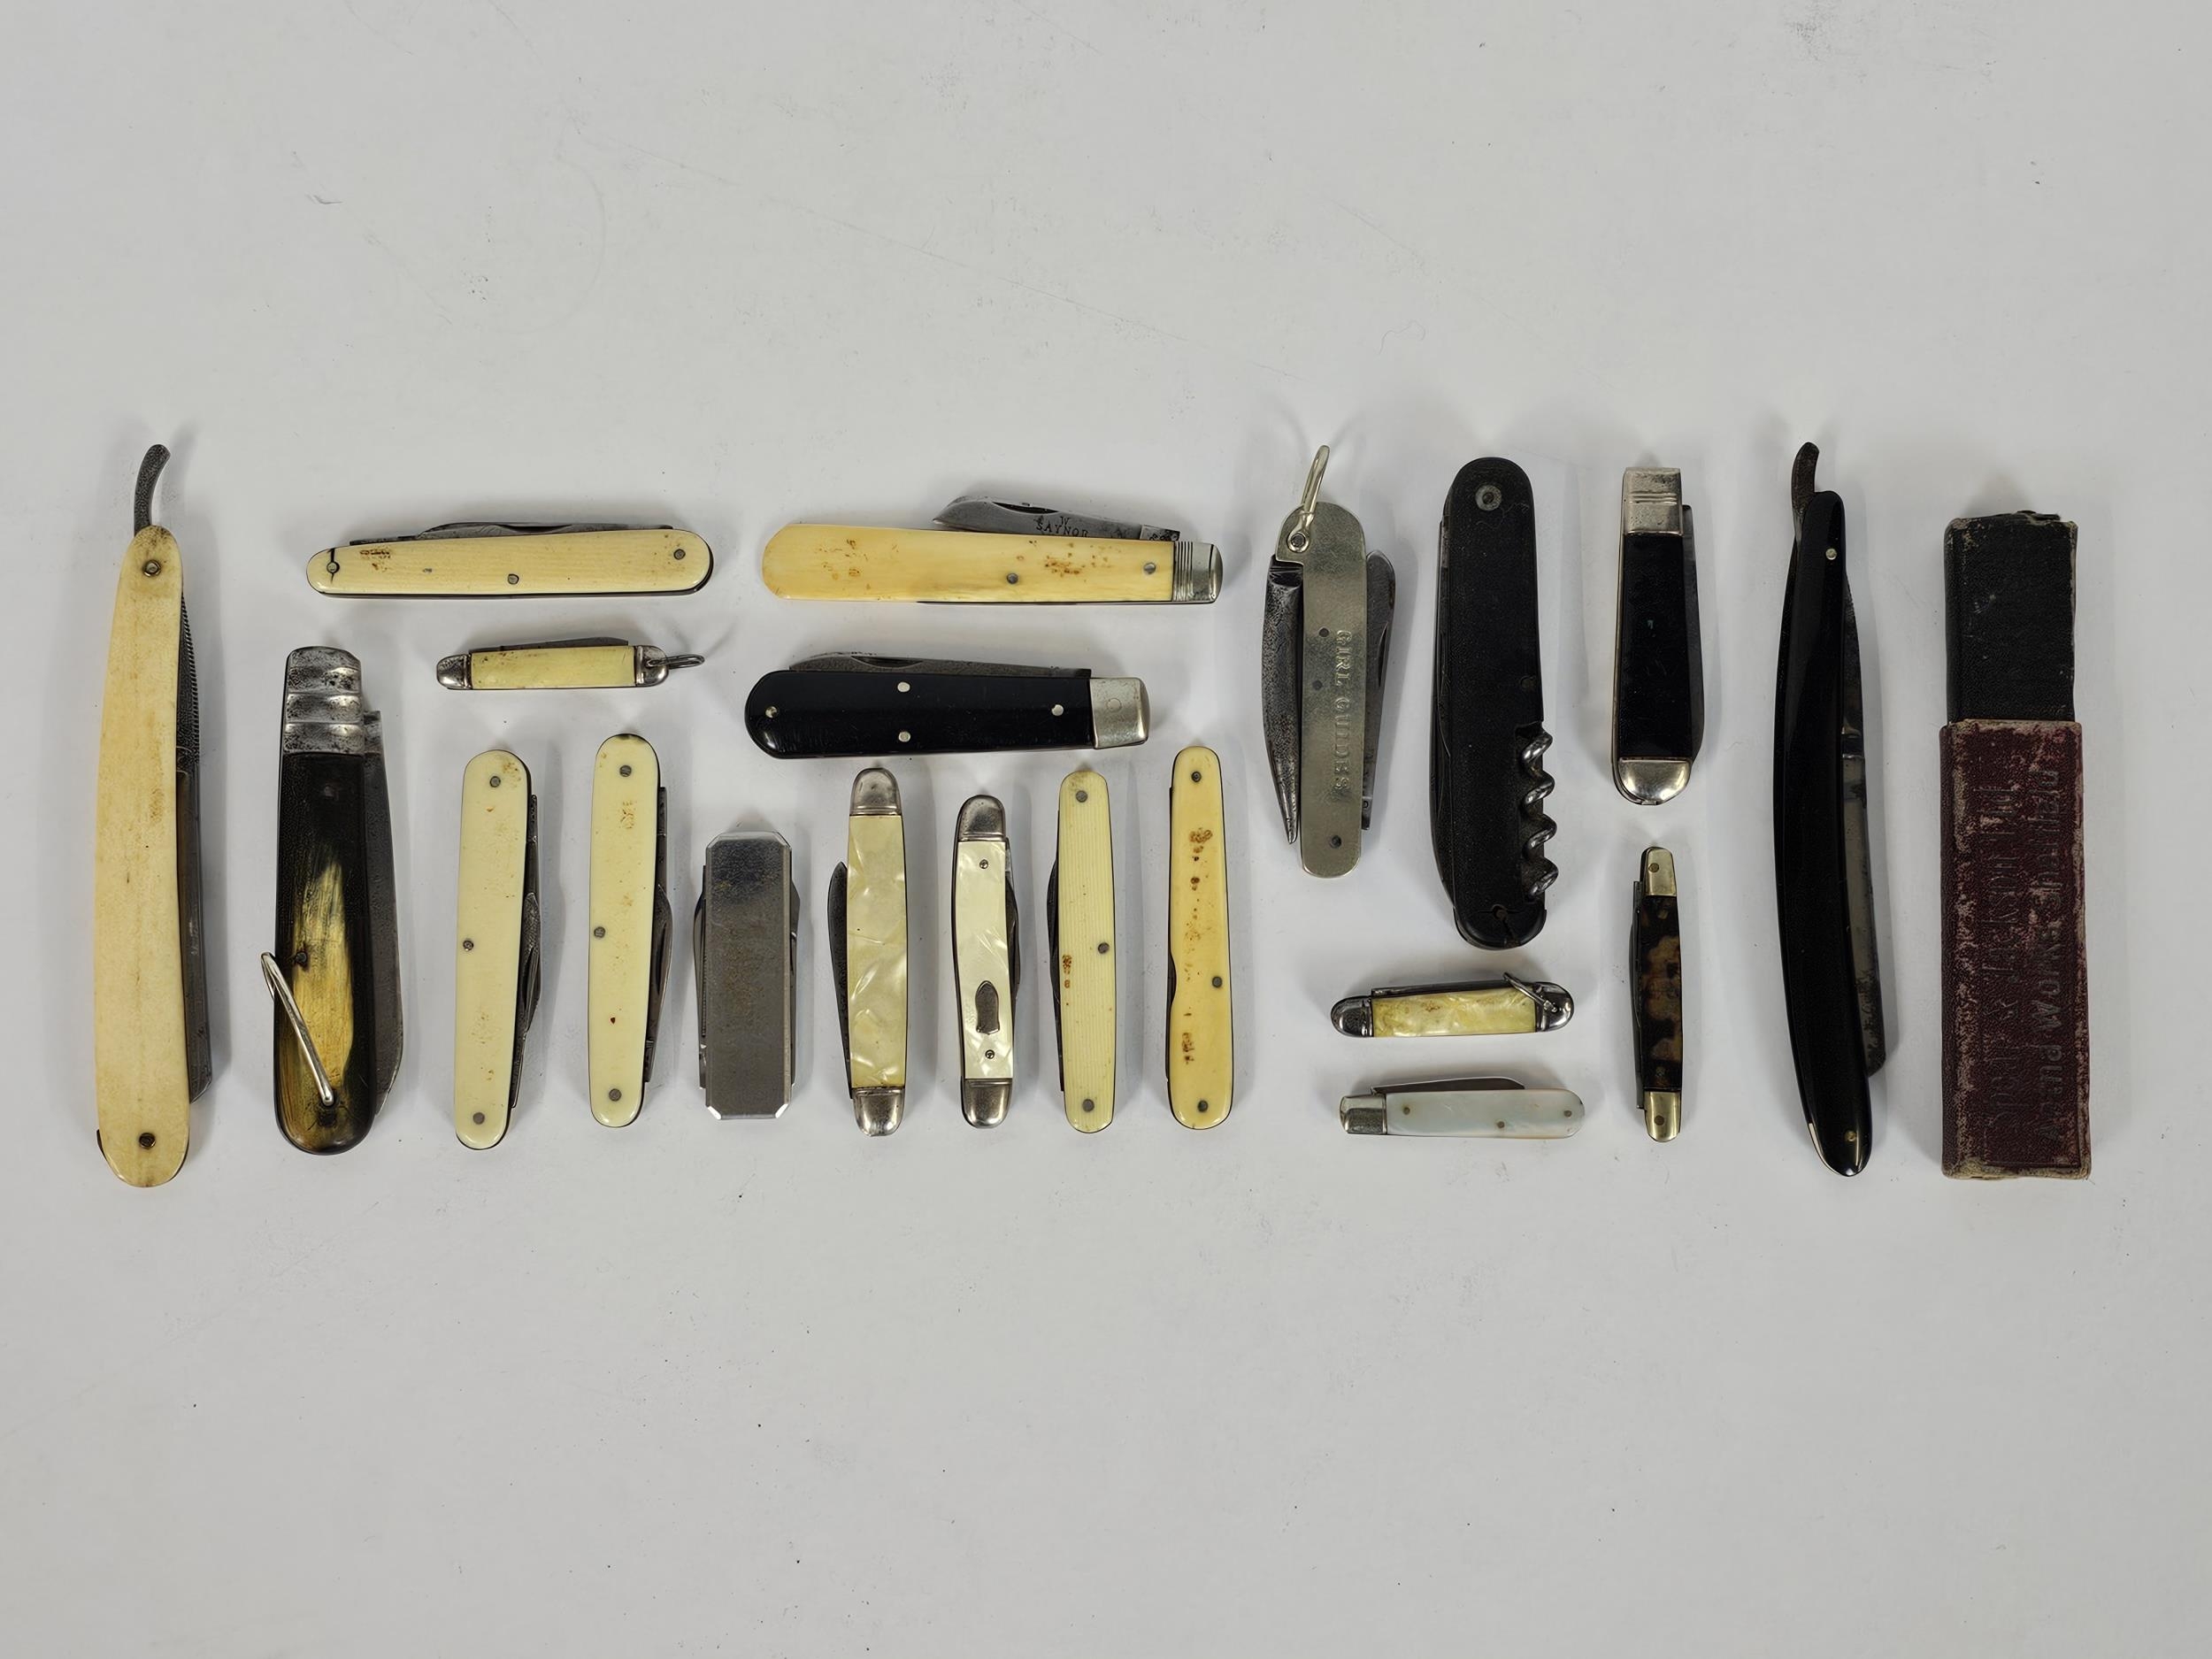 A quantity of penknives and straight-edge razors